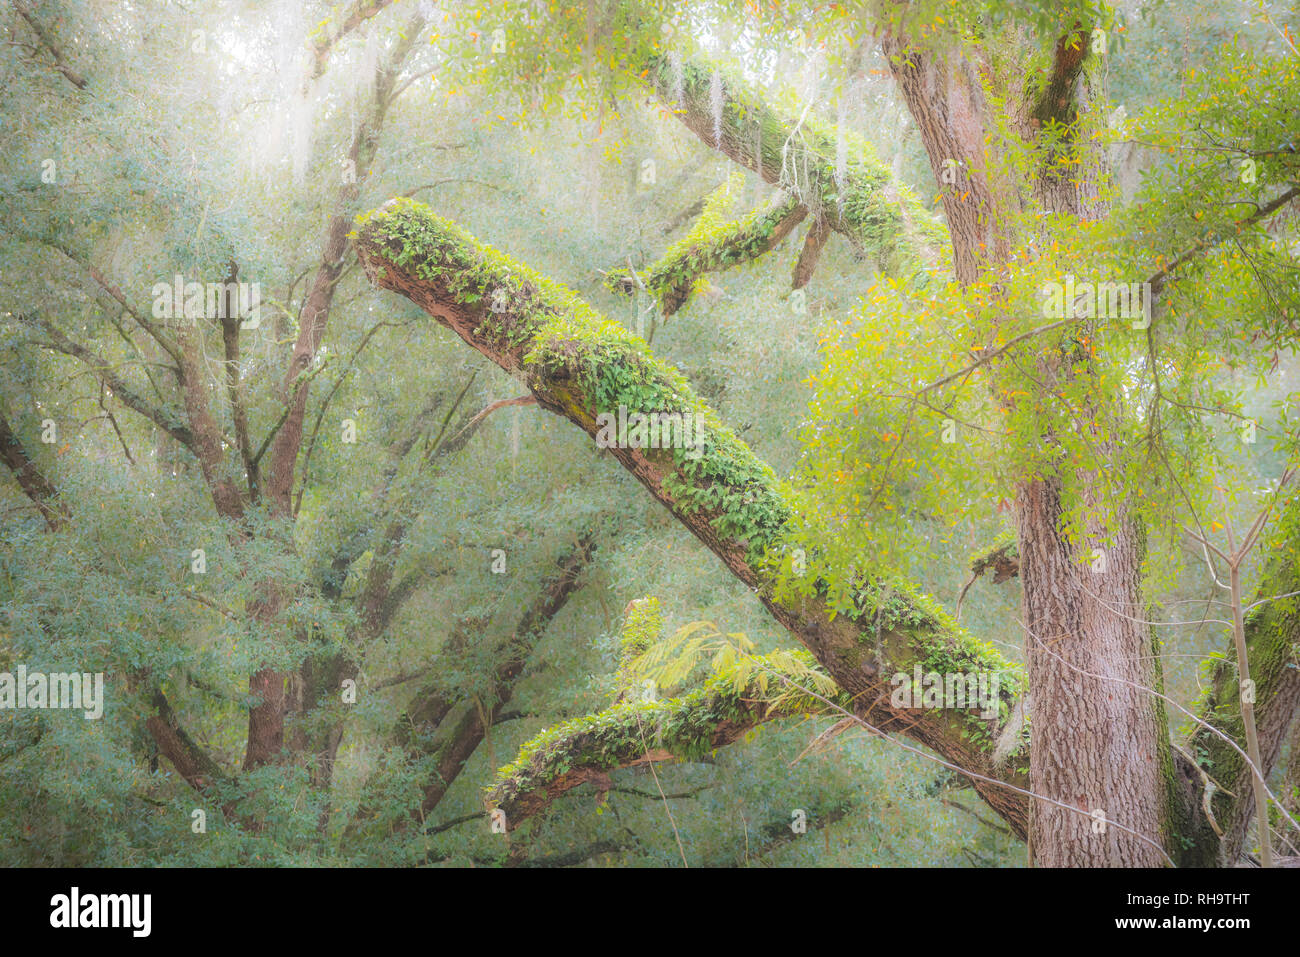 Old dead Live Oak tree with moss and Resurrection fern covered branches and limbs. Stock Photo